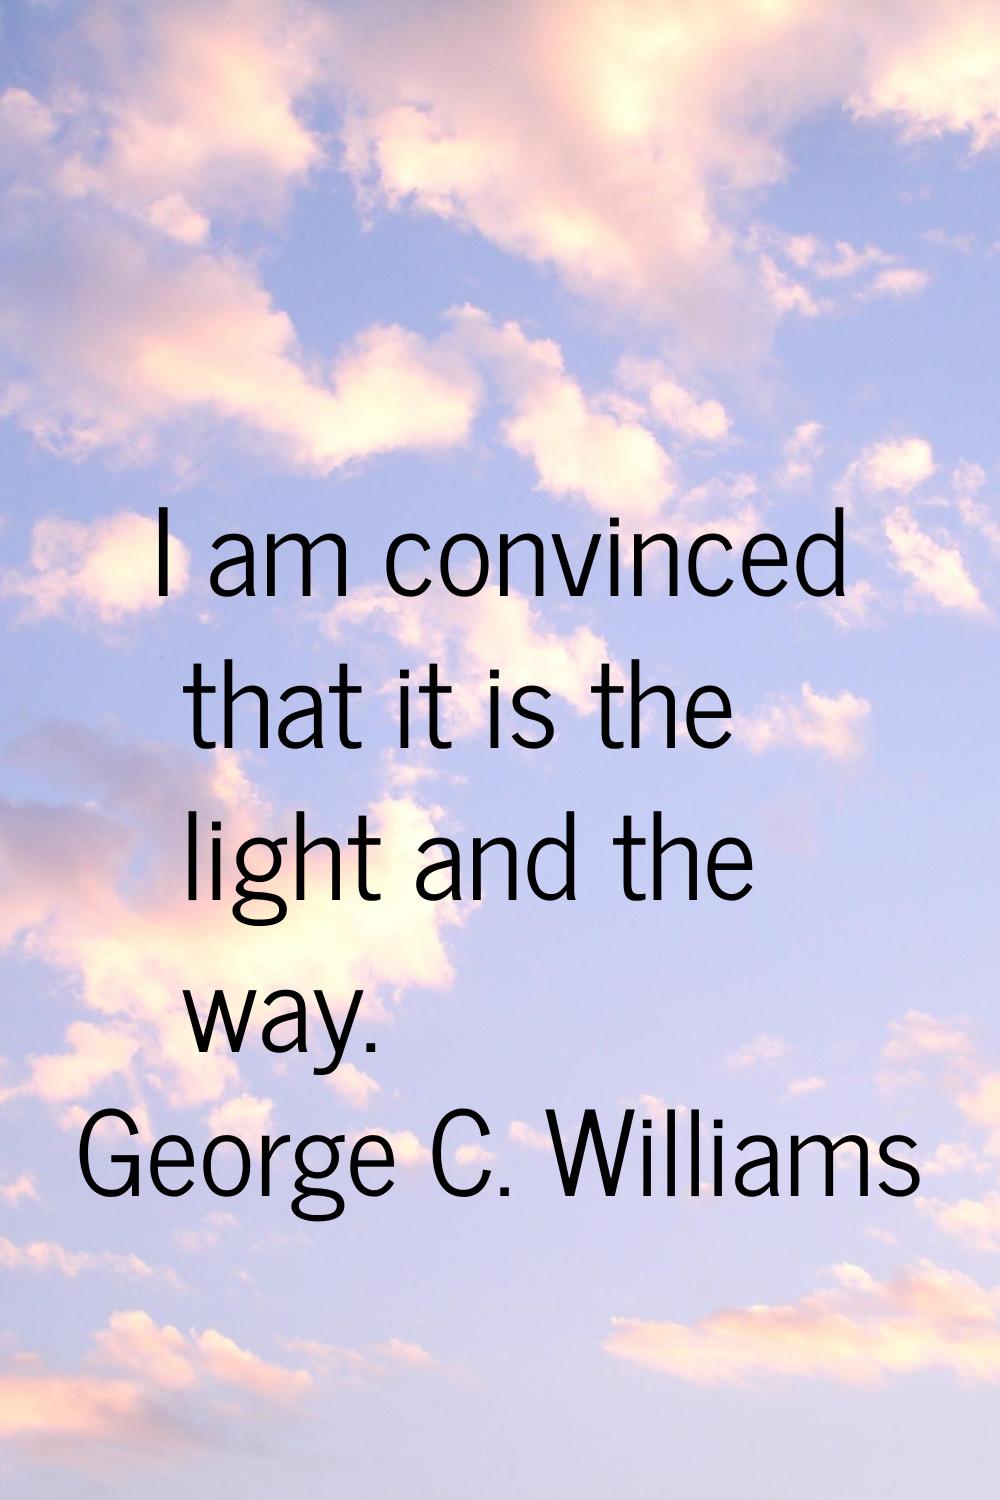 I am convinced that it is the light and the way.